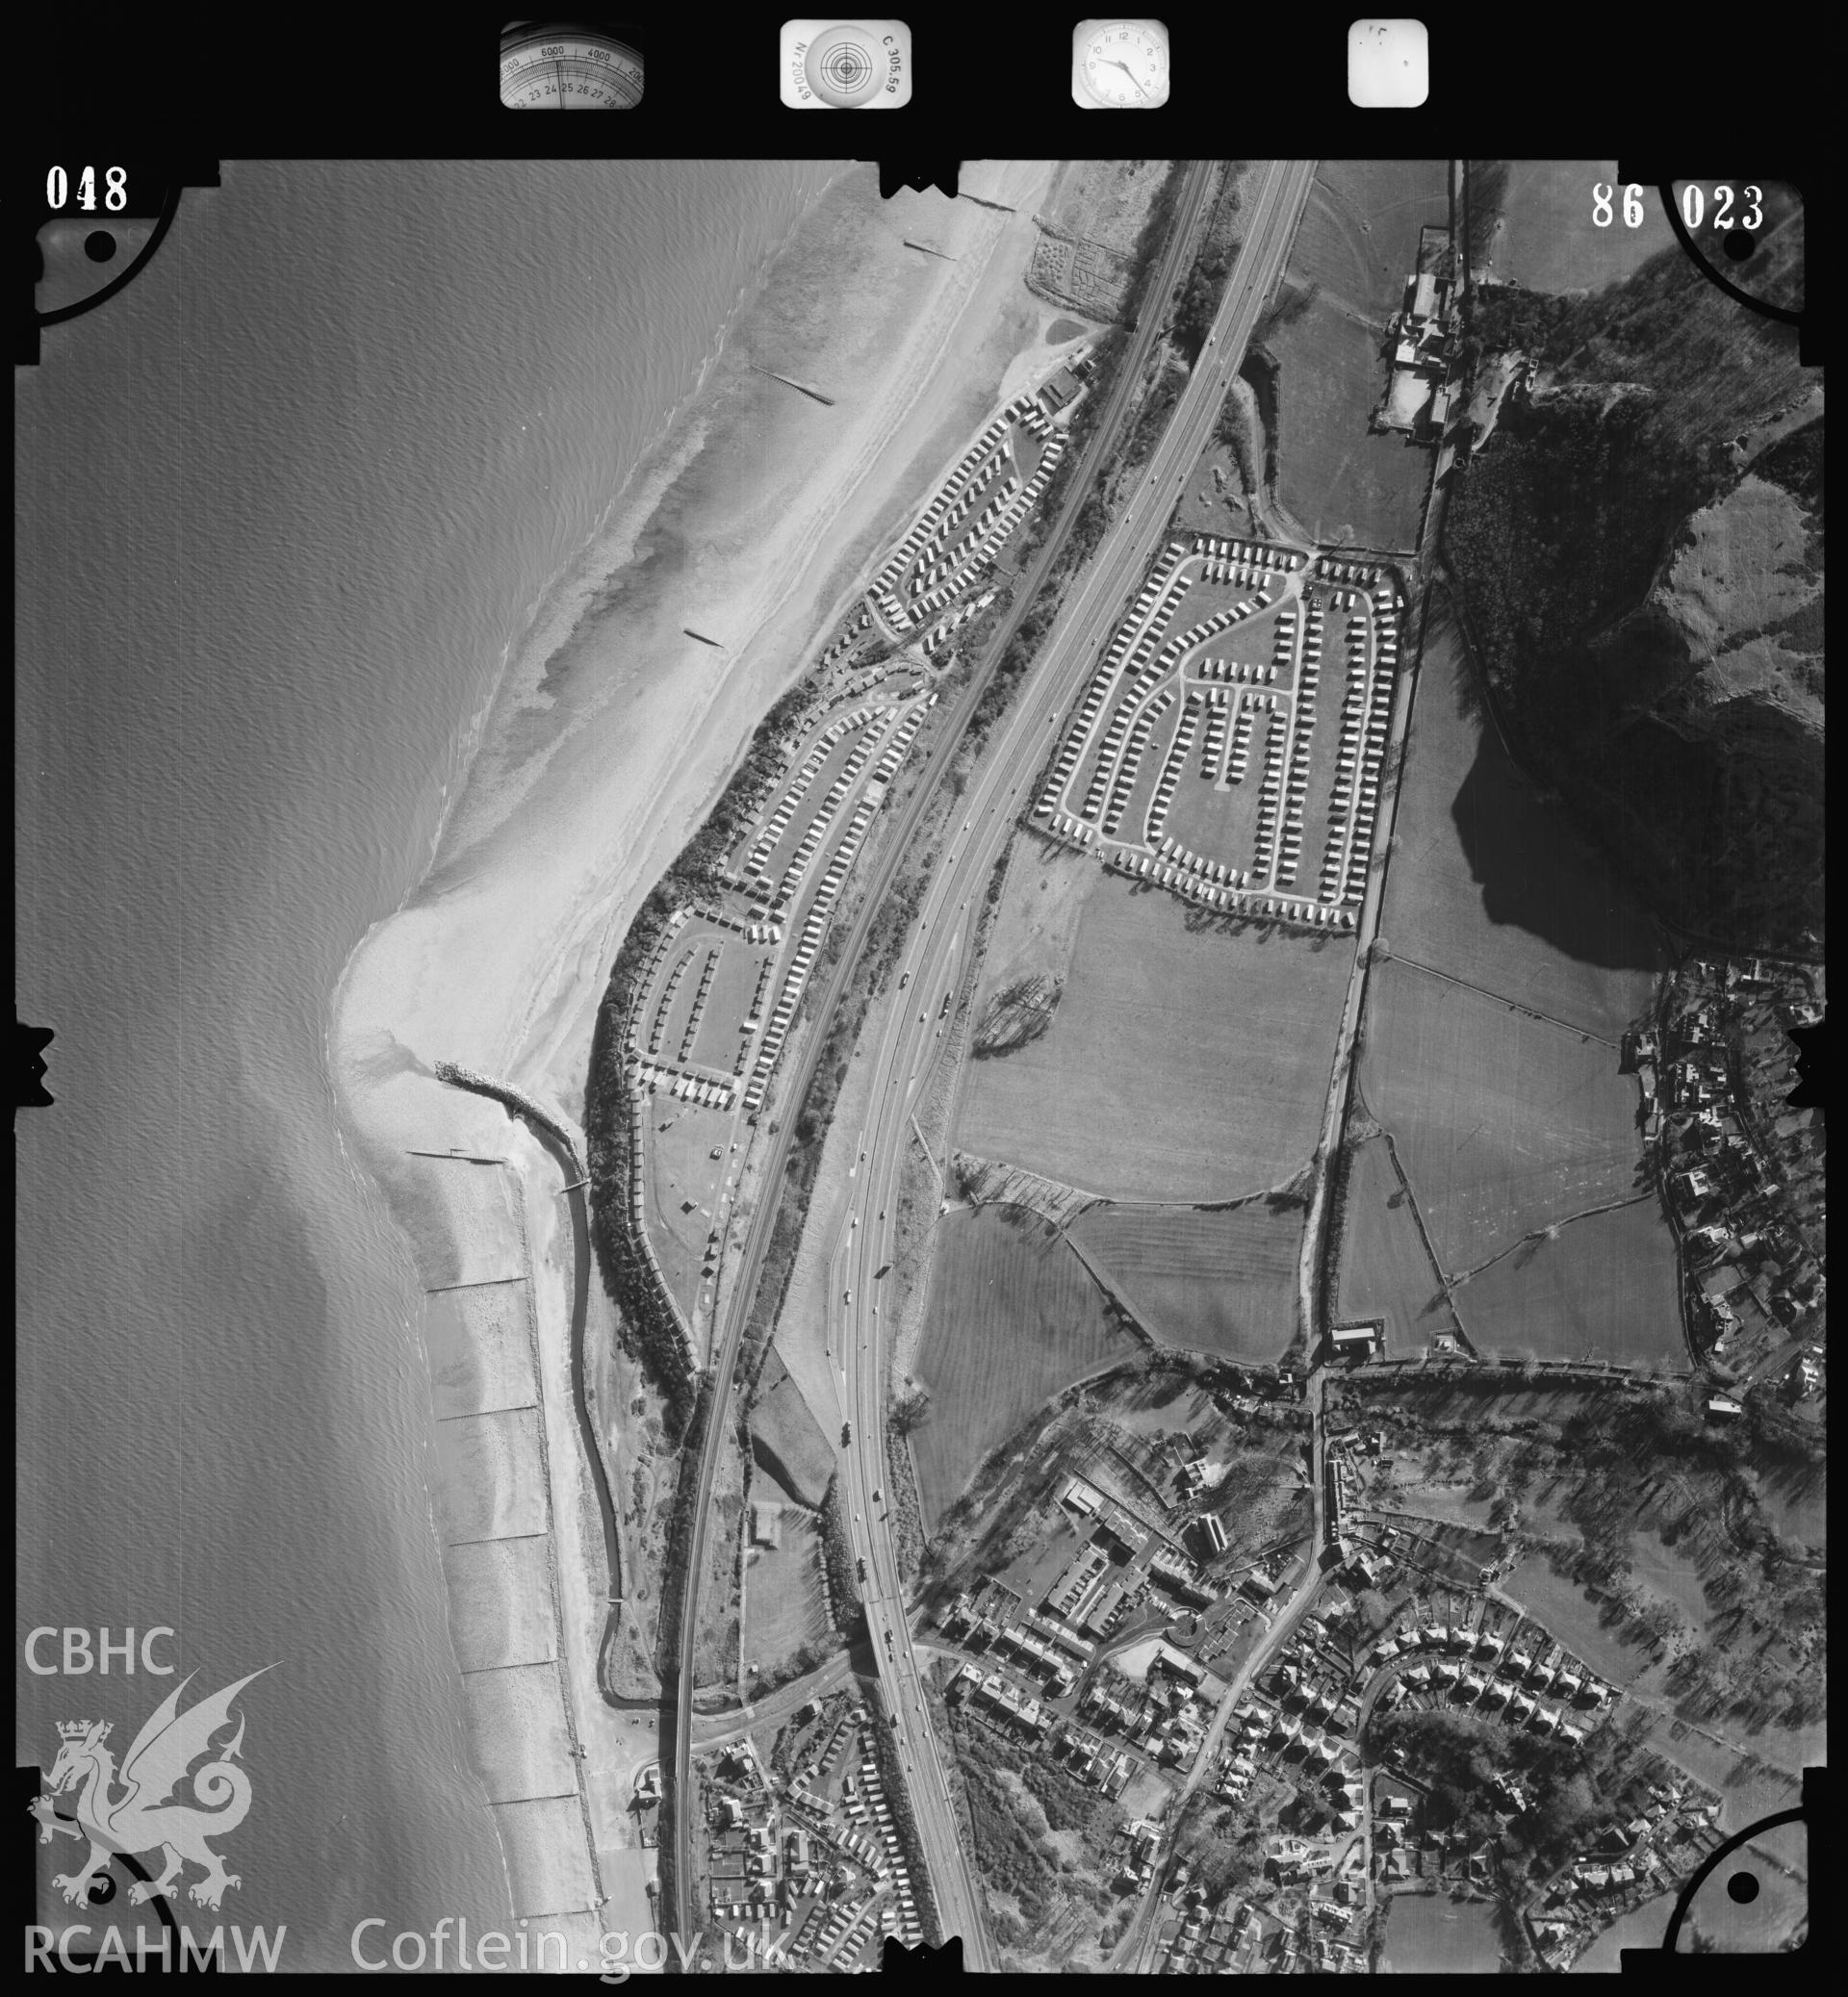 Digitized copy of an aerial photograph showing Dulas Railway Viaduct and surrounding area, taken by Ordnance Survey, 1986.